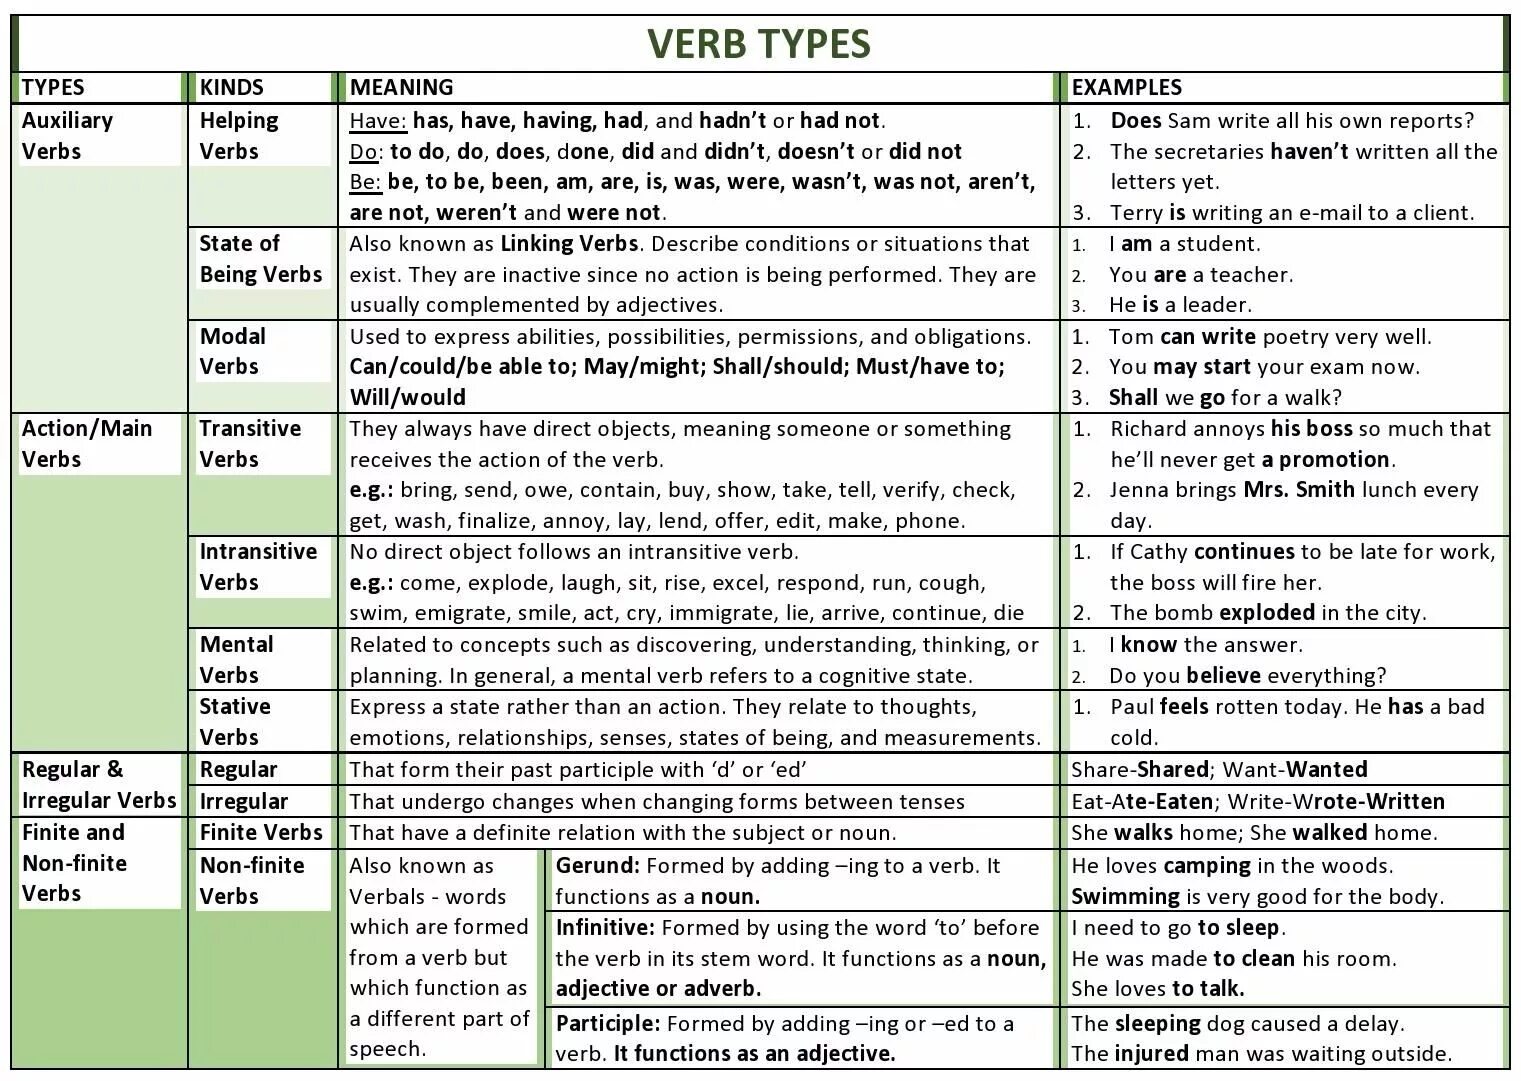 Types of verbs. Types of verbs in English. Auxiliary verbs в английском. Kinds of verbs.